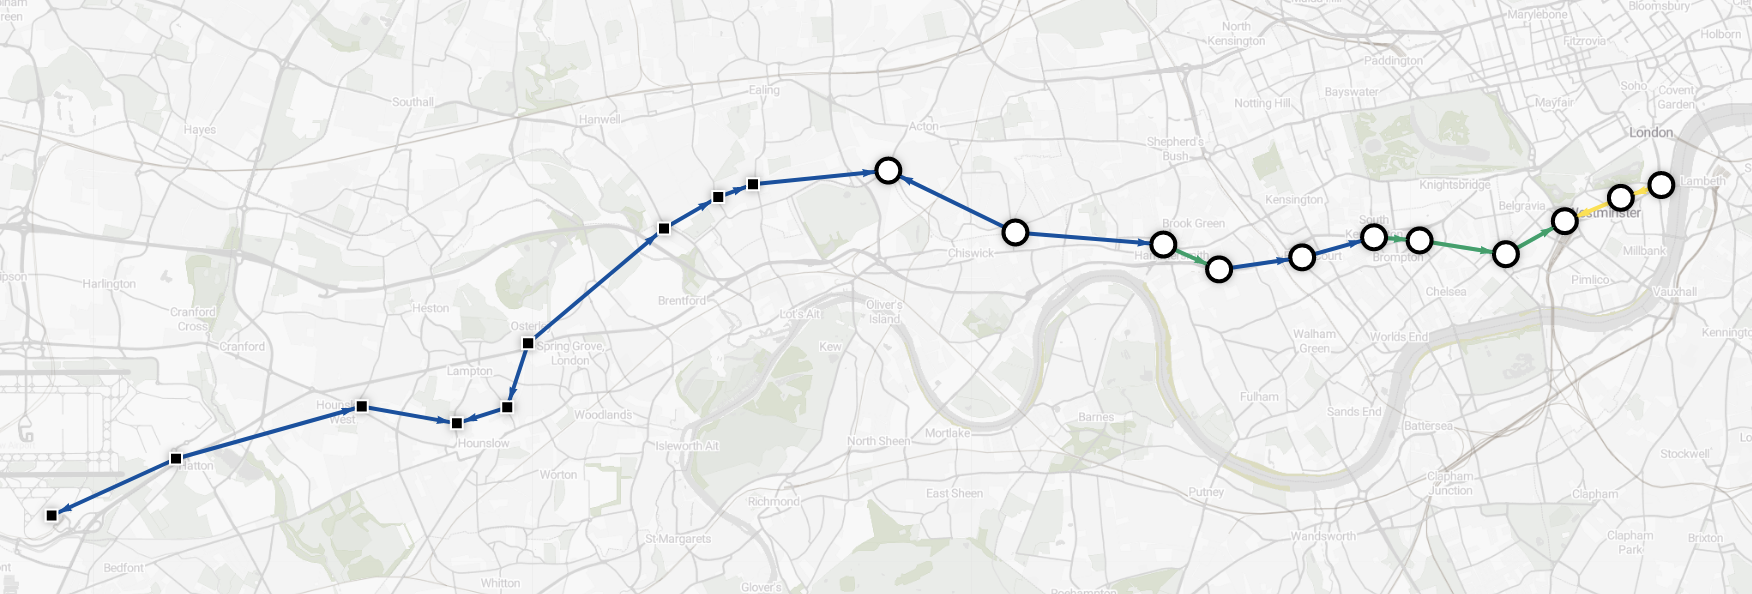 Data visualization - shortest route from Heathrow to Westminster